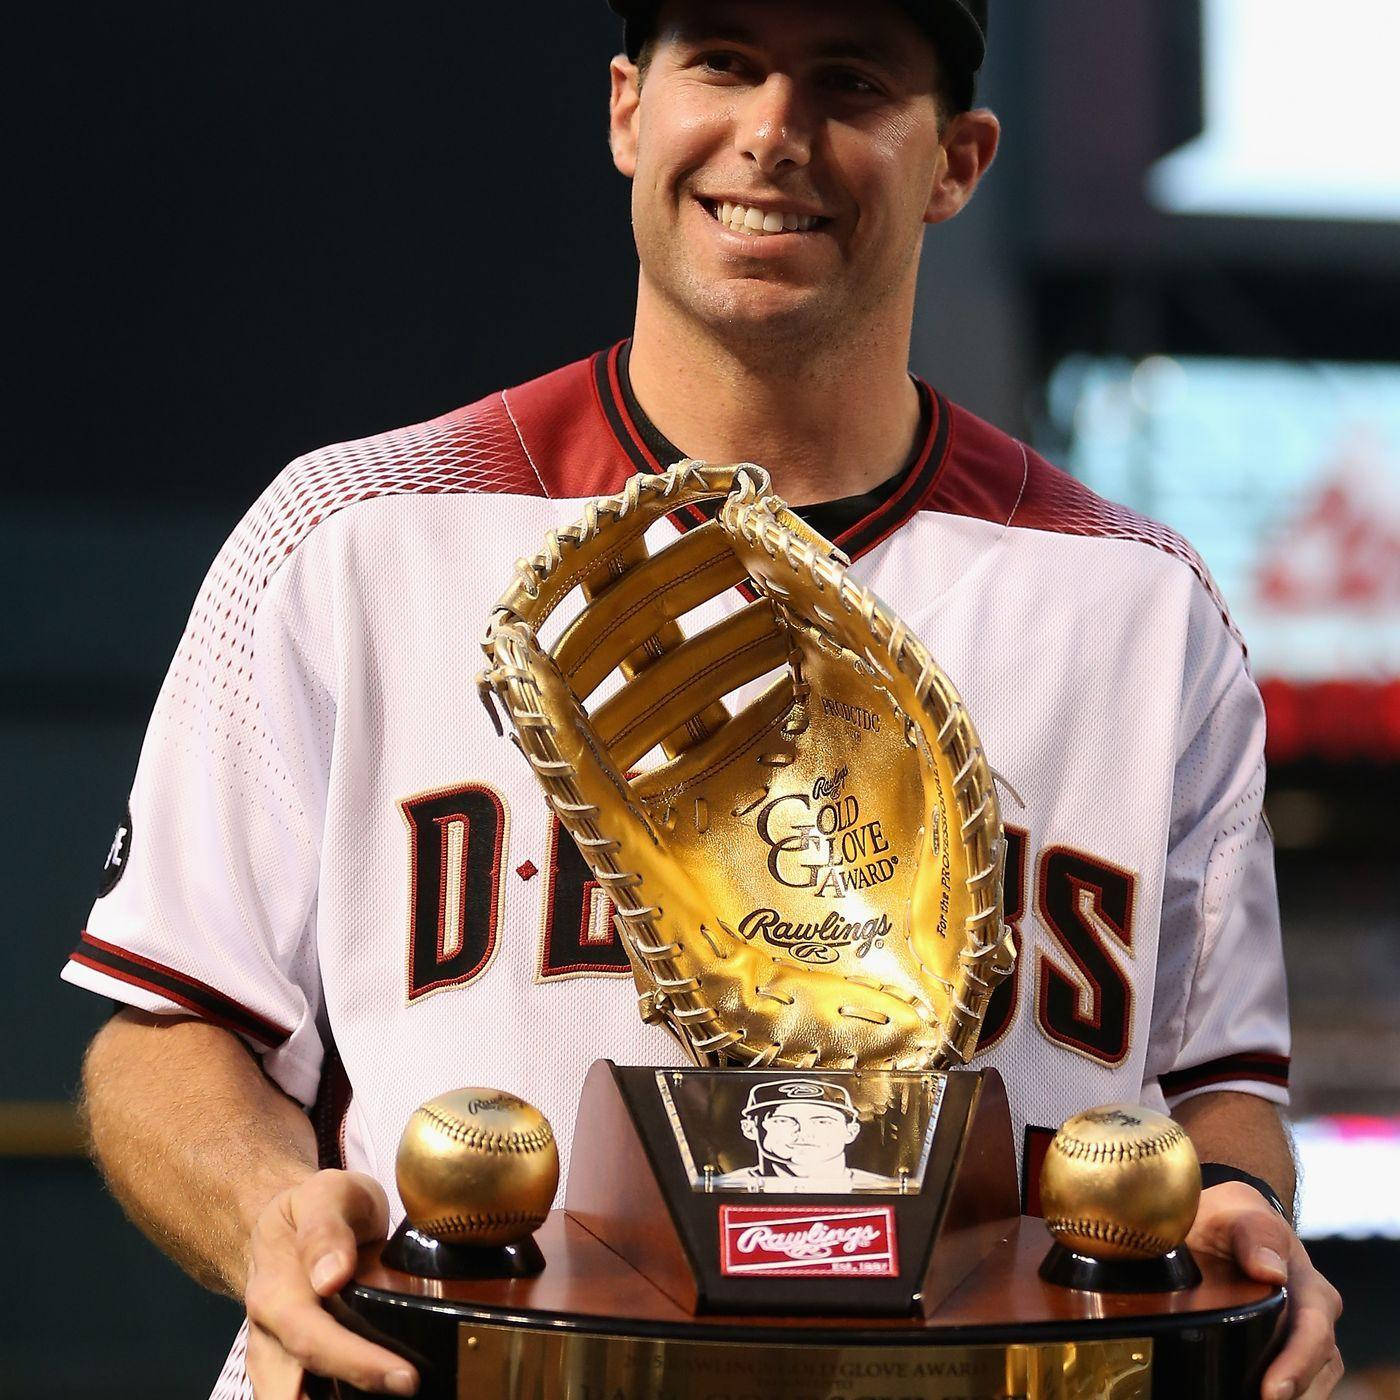 Download Paul Goldschmidt proudly holding his Gold Glove Award